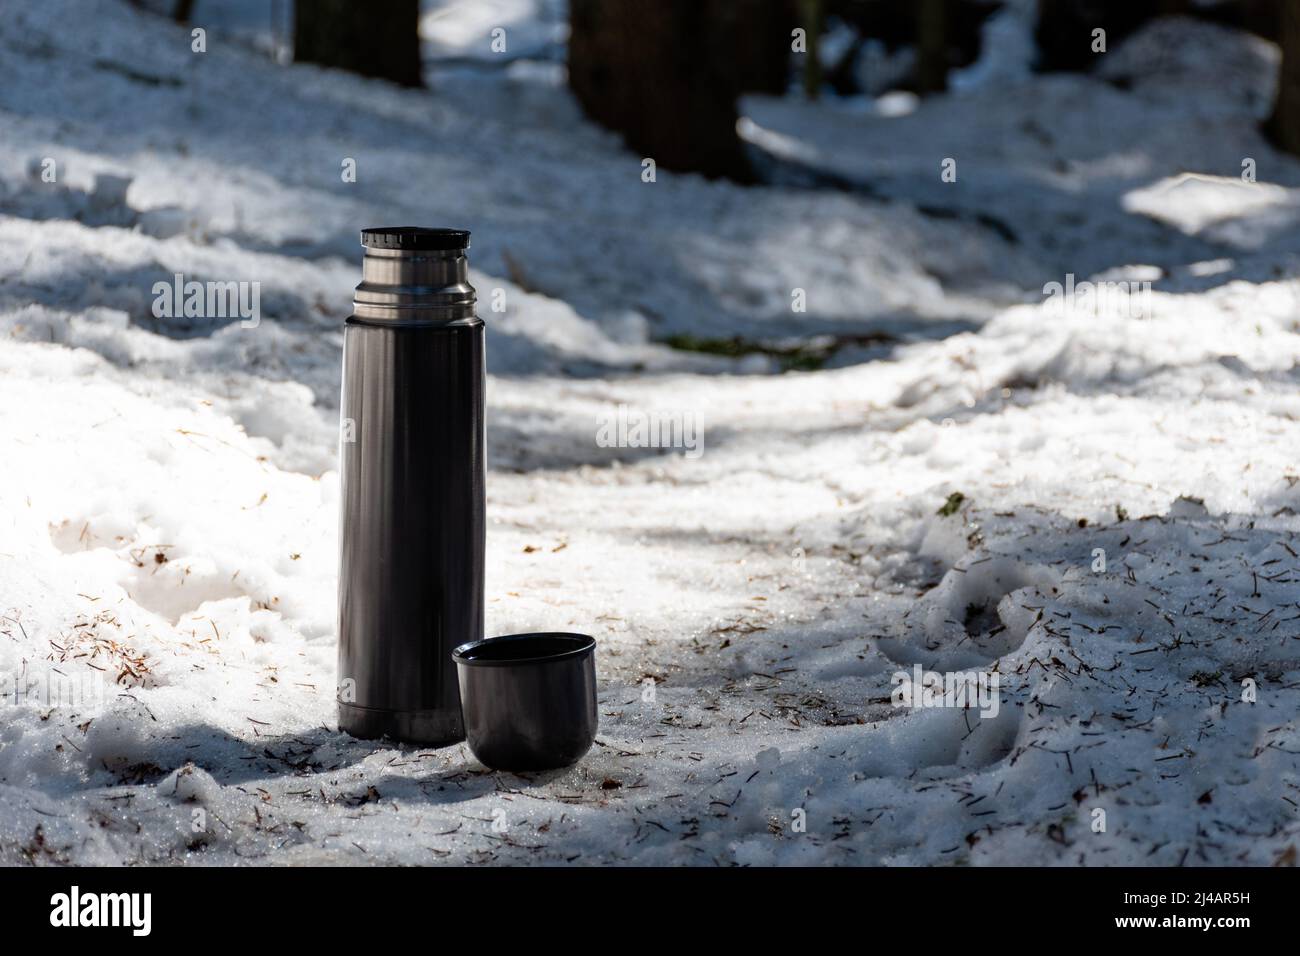 https://c8.alamy.com/comp/2J4AR5H/thermos-bottle-and-mug-on-the-snow-in-the-forest-on-a-sunny-day-in-early-spring-2J4AR5H.jpg